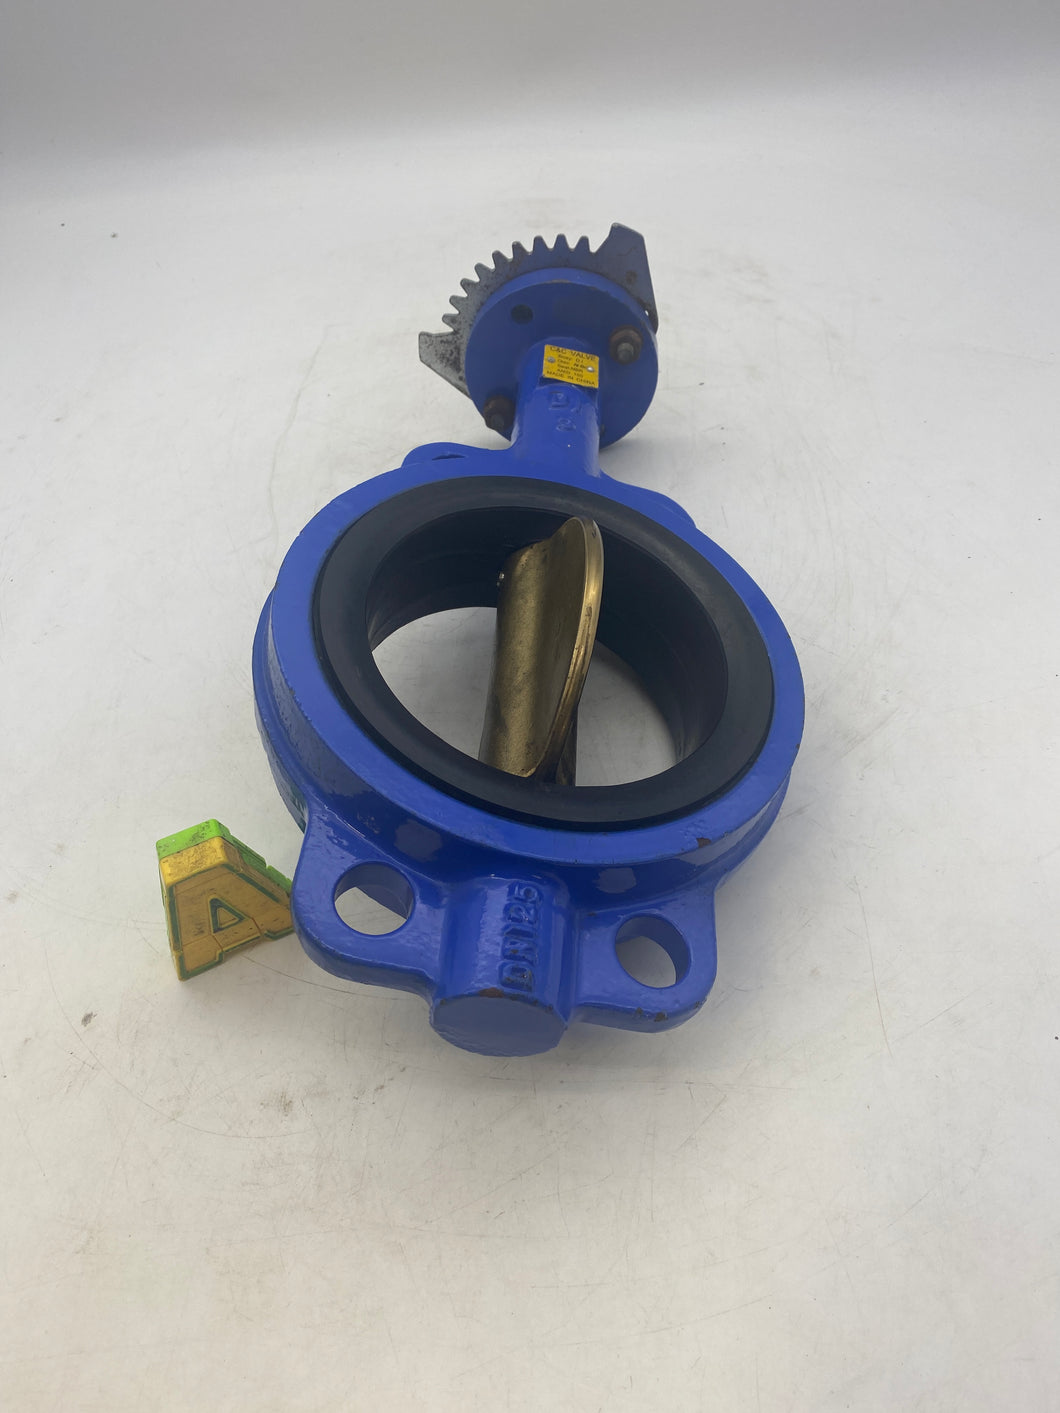 C&C C200 Wafer and Lug Style Butterfly Valve, 5